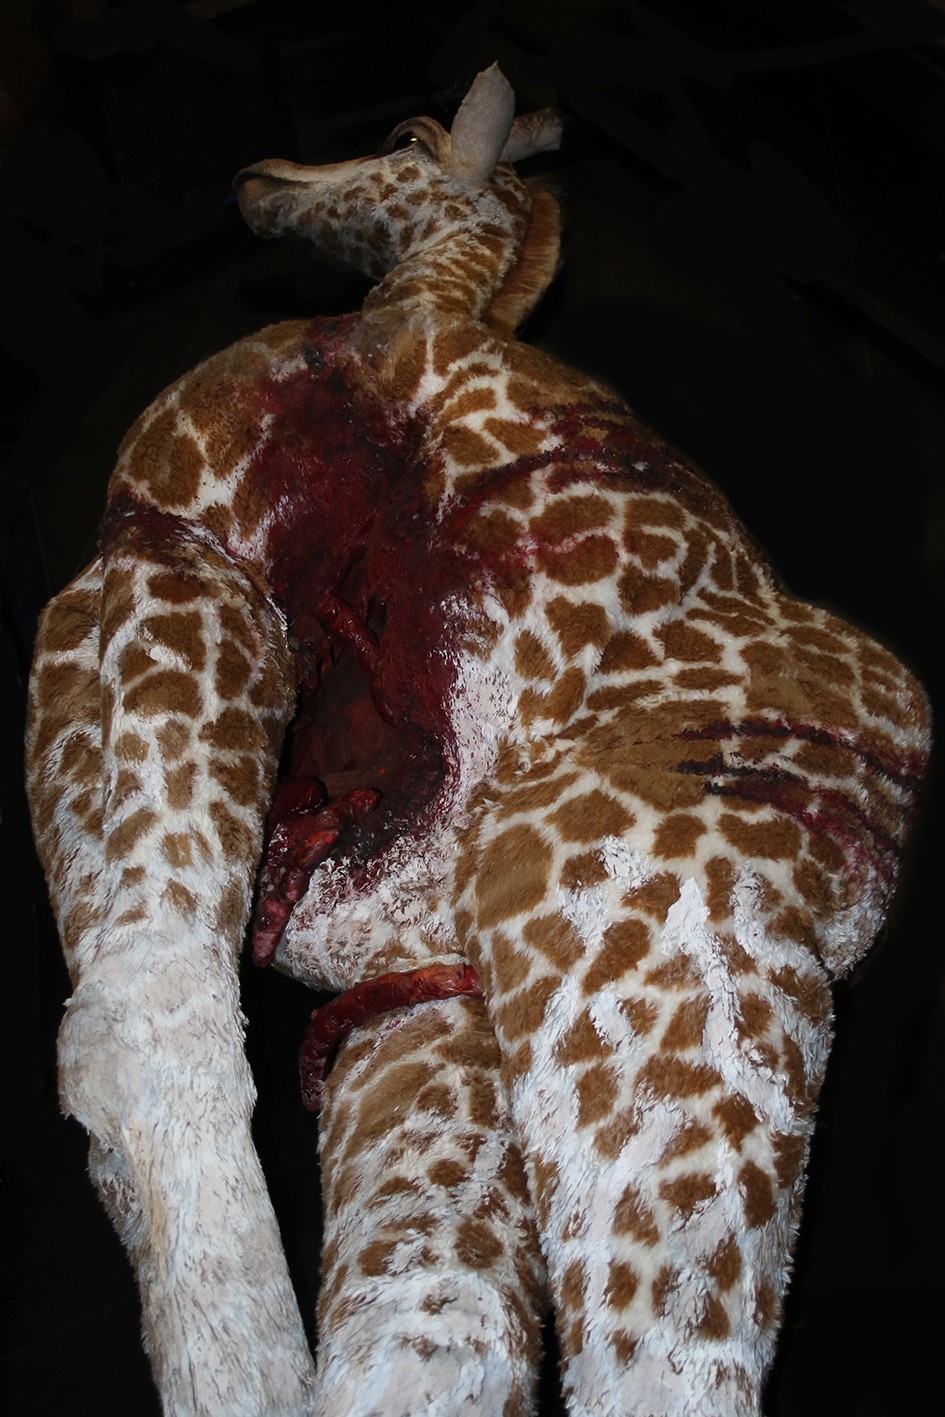 A giraffe prop with his belly torn open and intestines bulging out